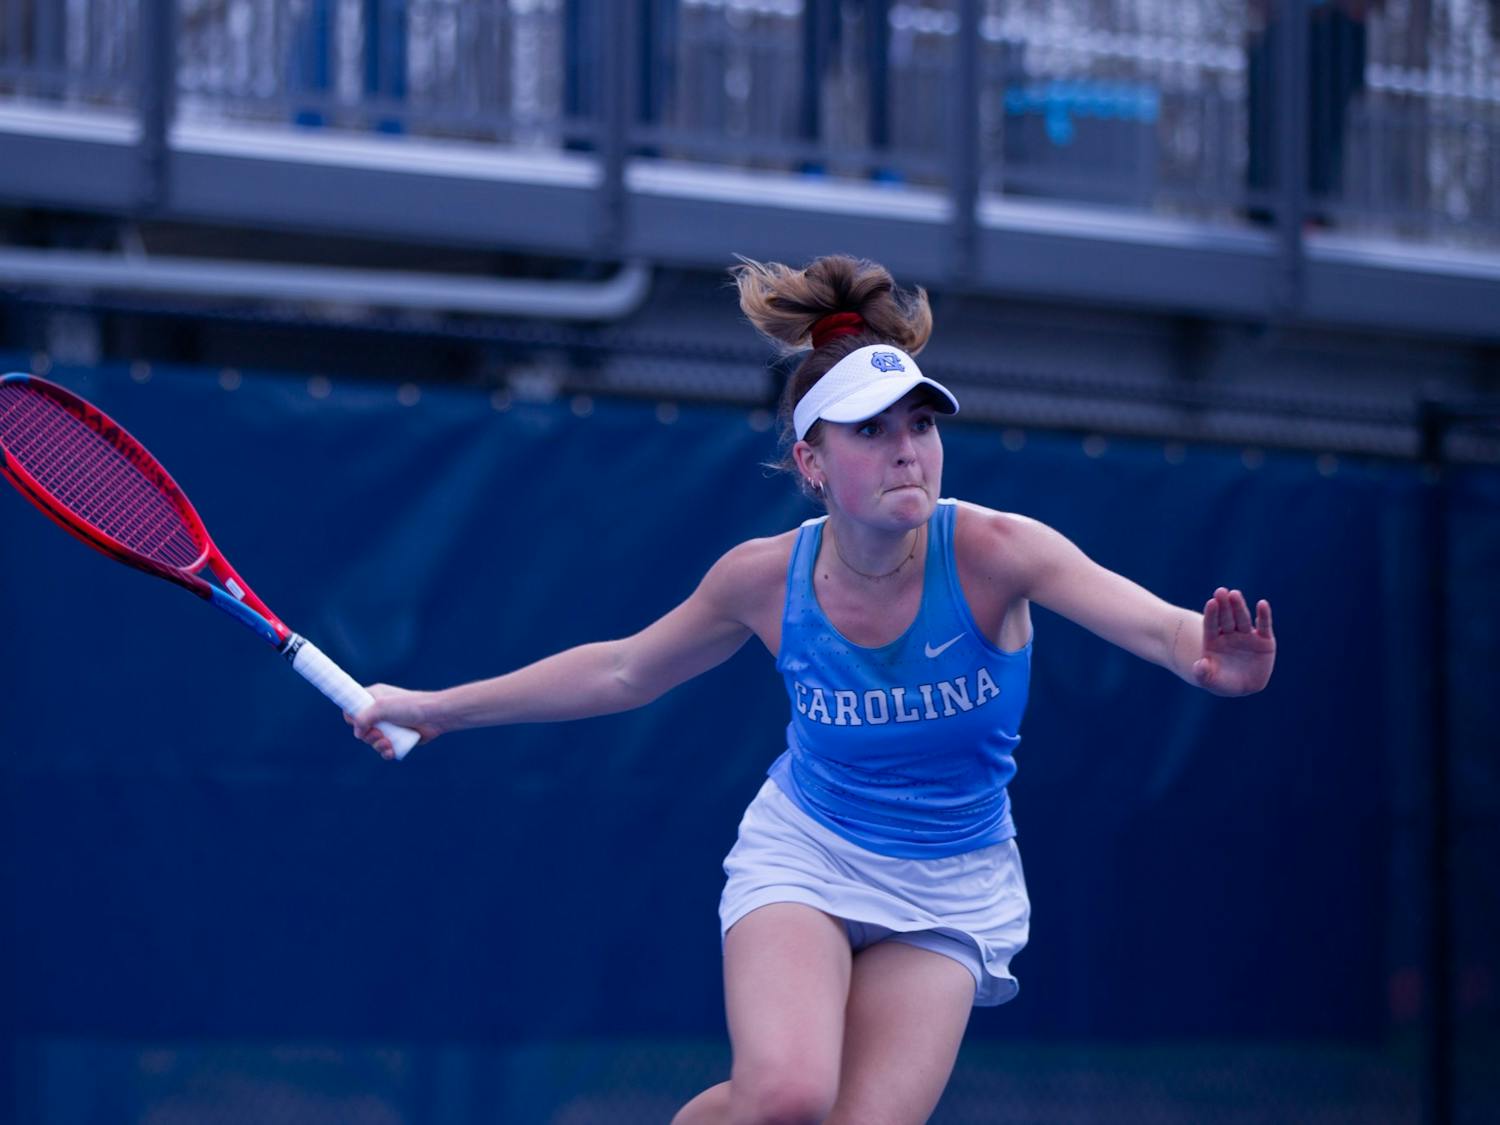 UNC junior Fiona Crawley swinging the racket at a match against the Florida State University Seminoles at the Cone-Kenfield Tennis Center on Friday, March 31, 2023. The Tar Heels won 6-1.